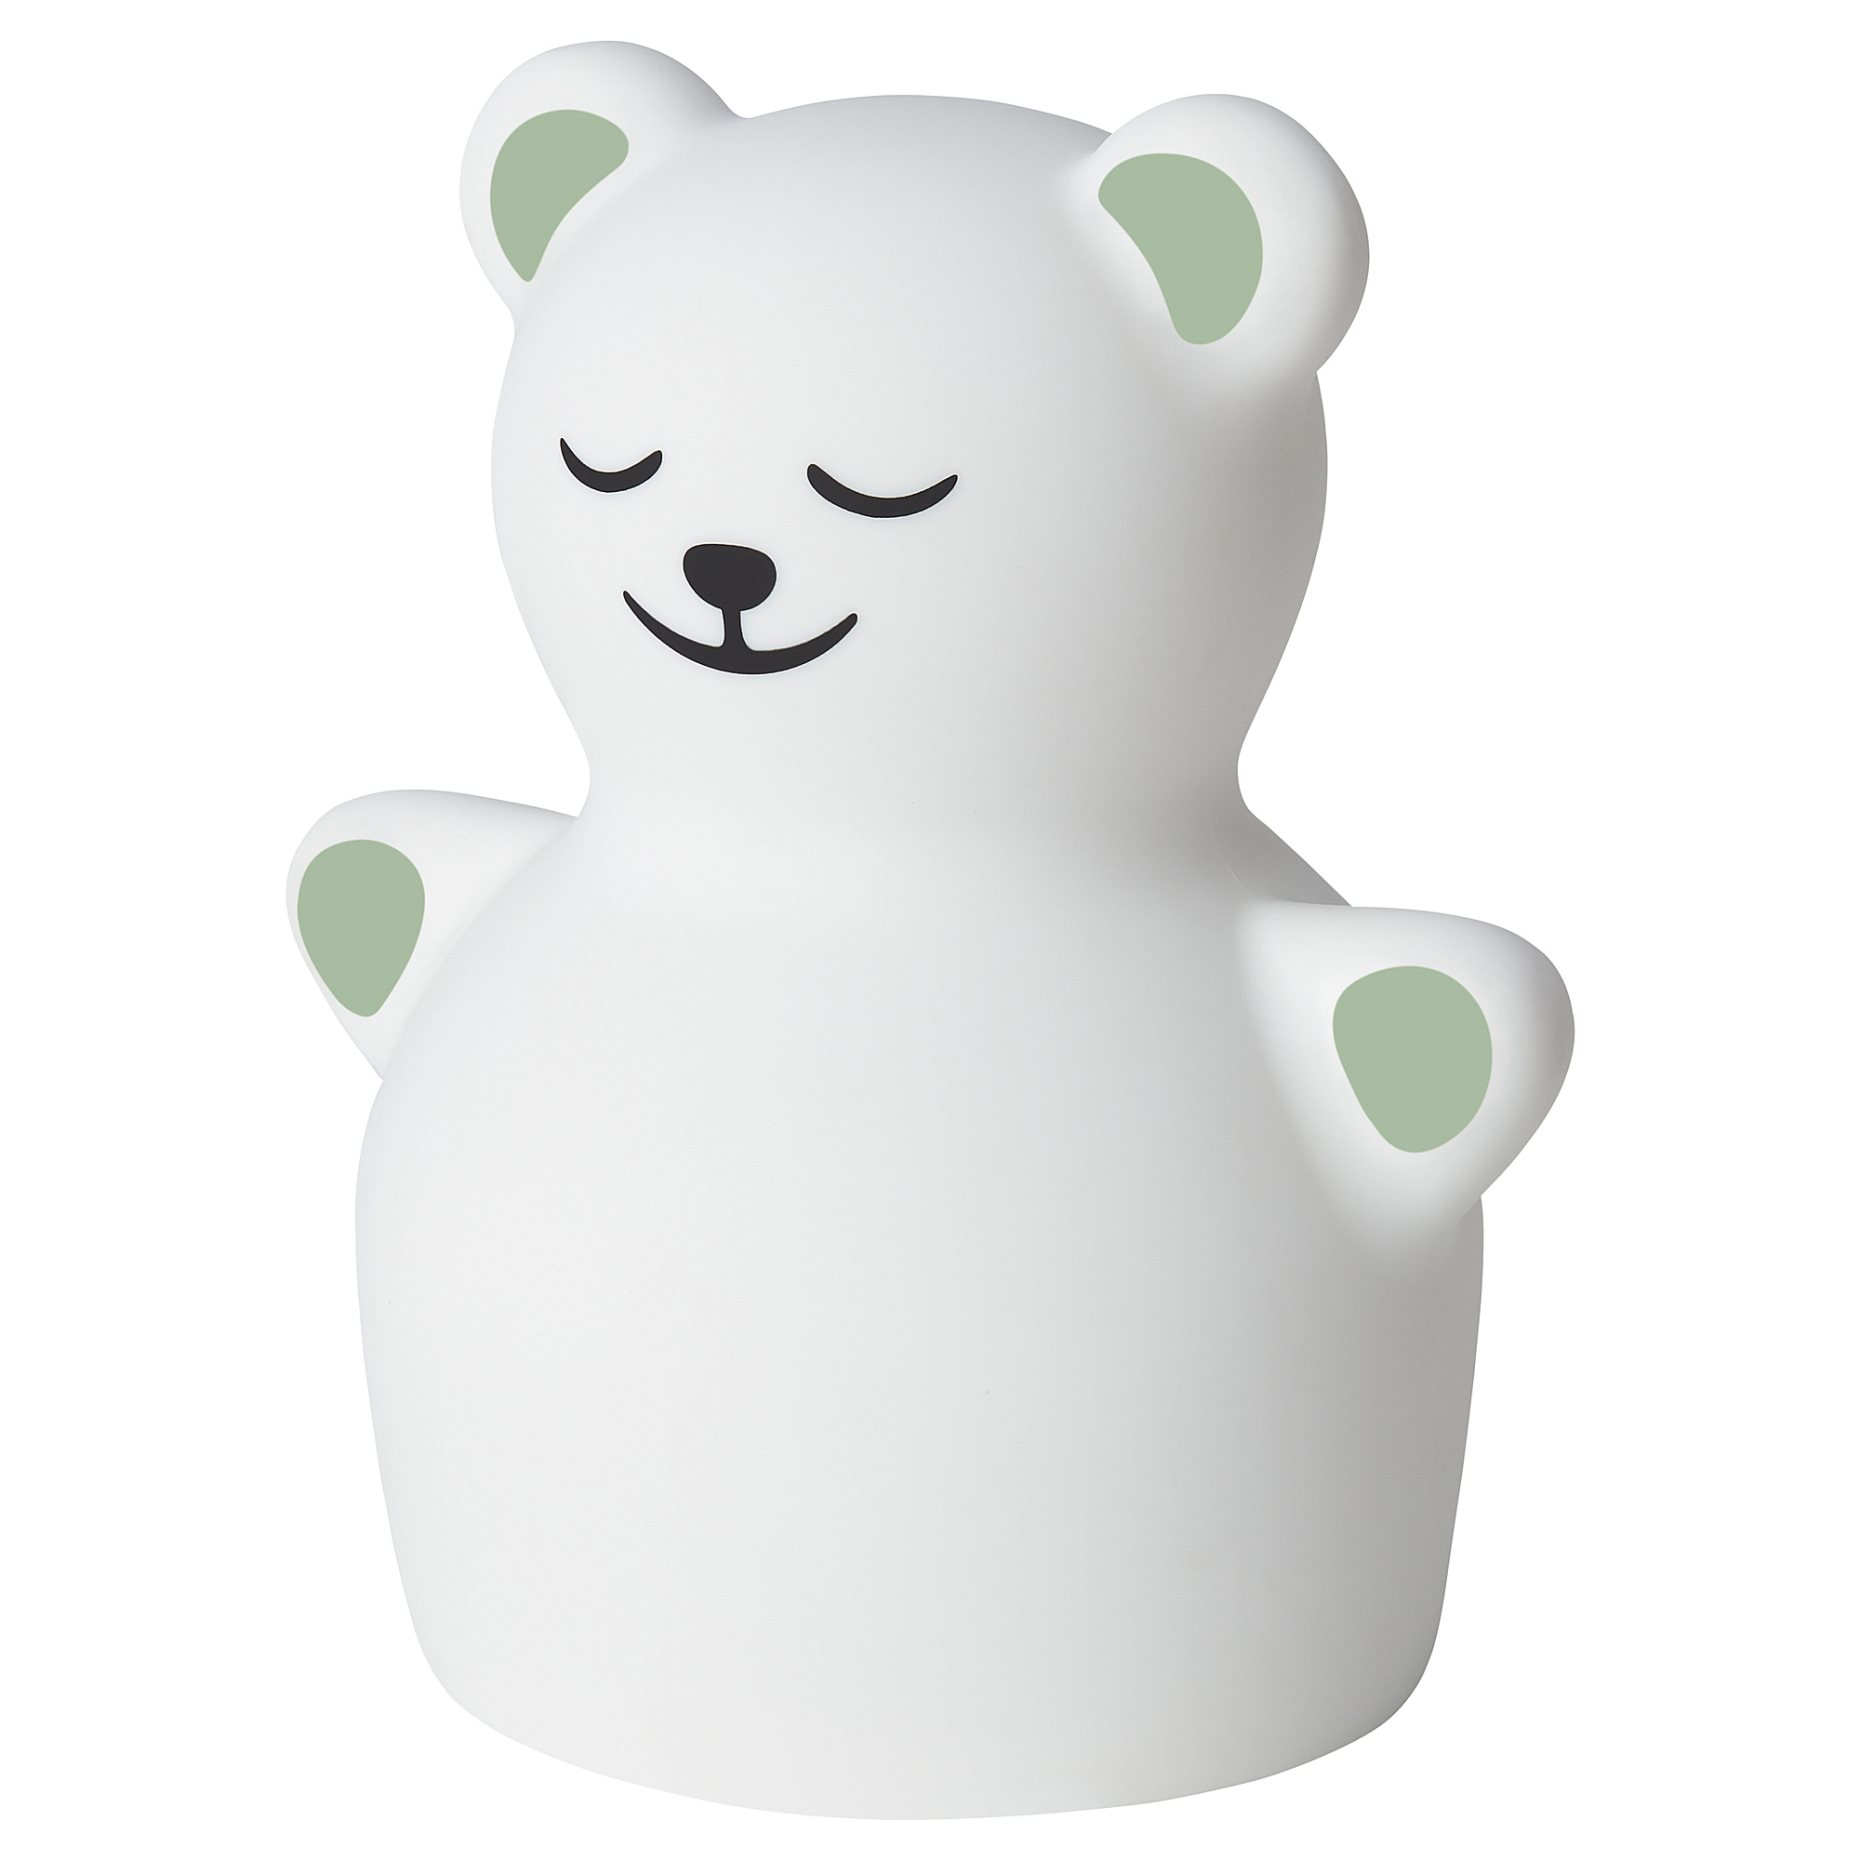 TÖVÄDER, night light with built-in LED light source/bear/battery-operated, 905.169.14